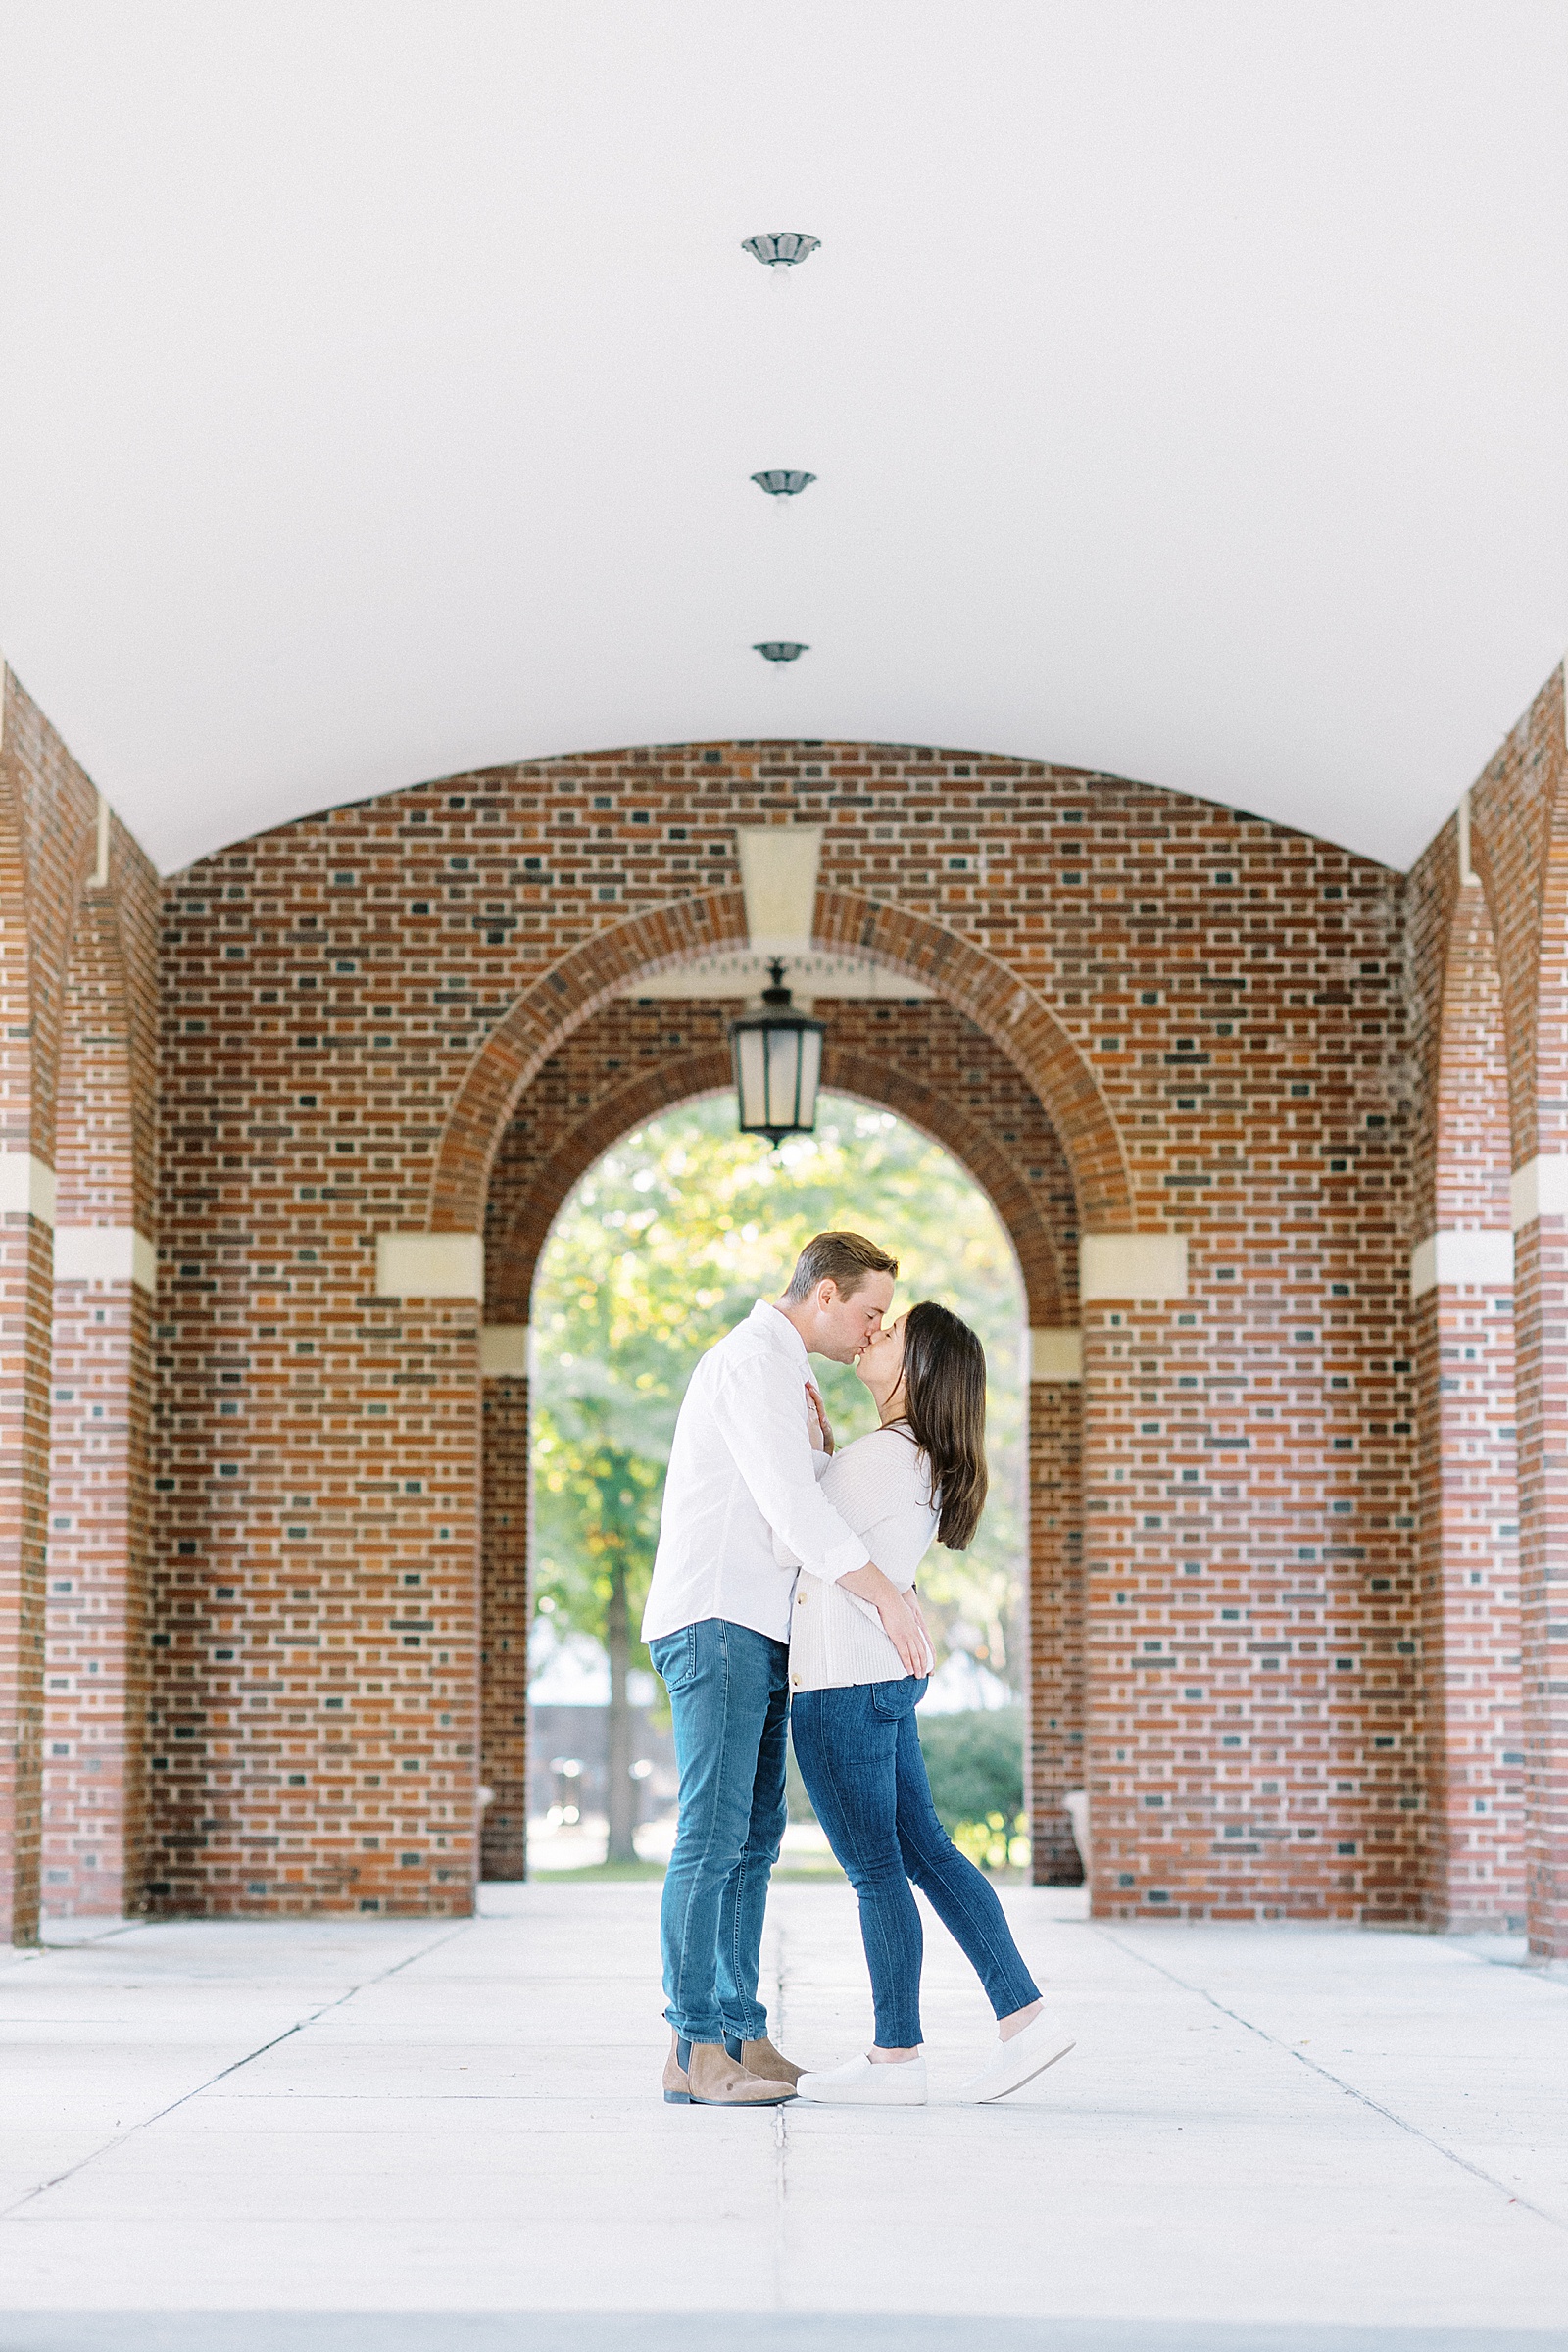 Couple kissing under red brick archways by New York Photographer, Lynne Reznick 